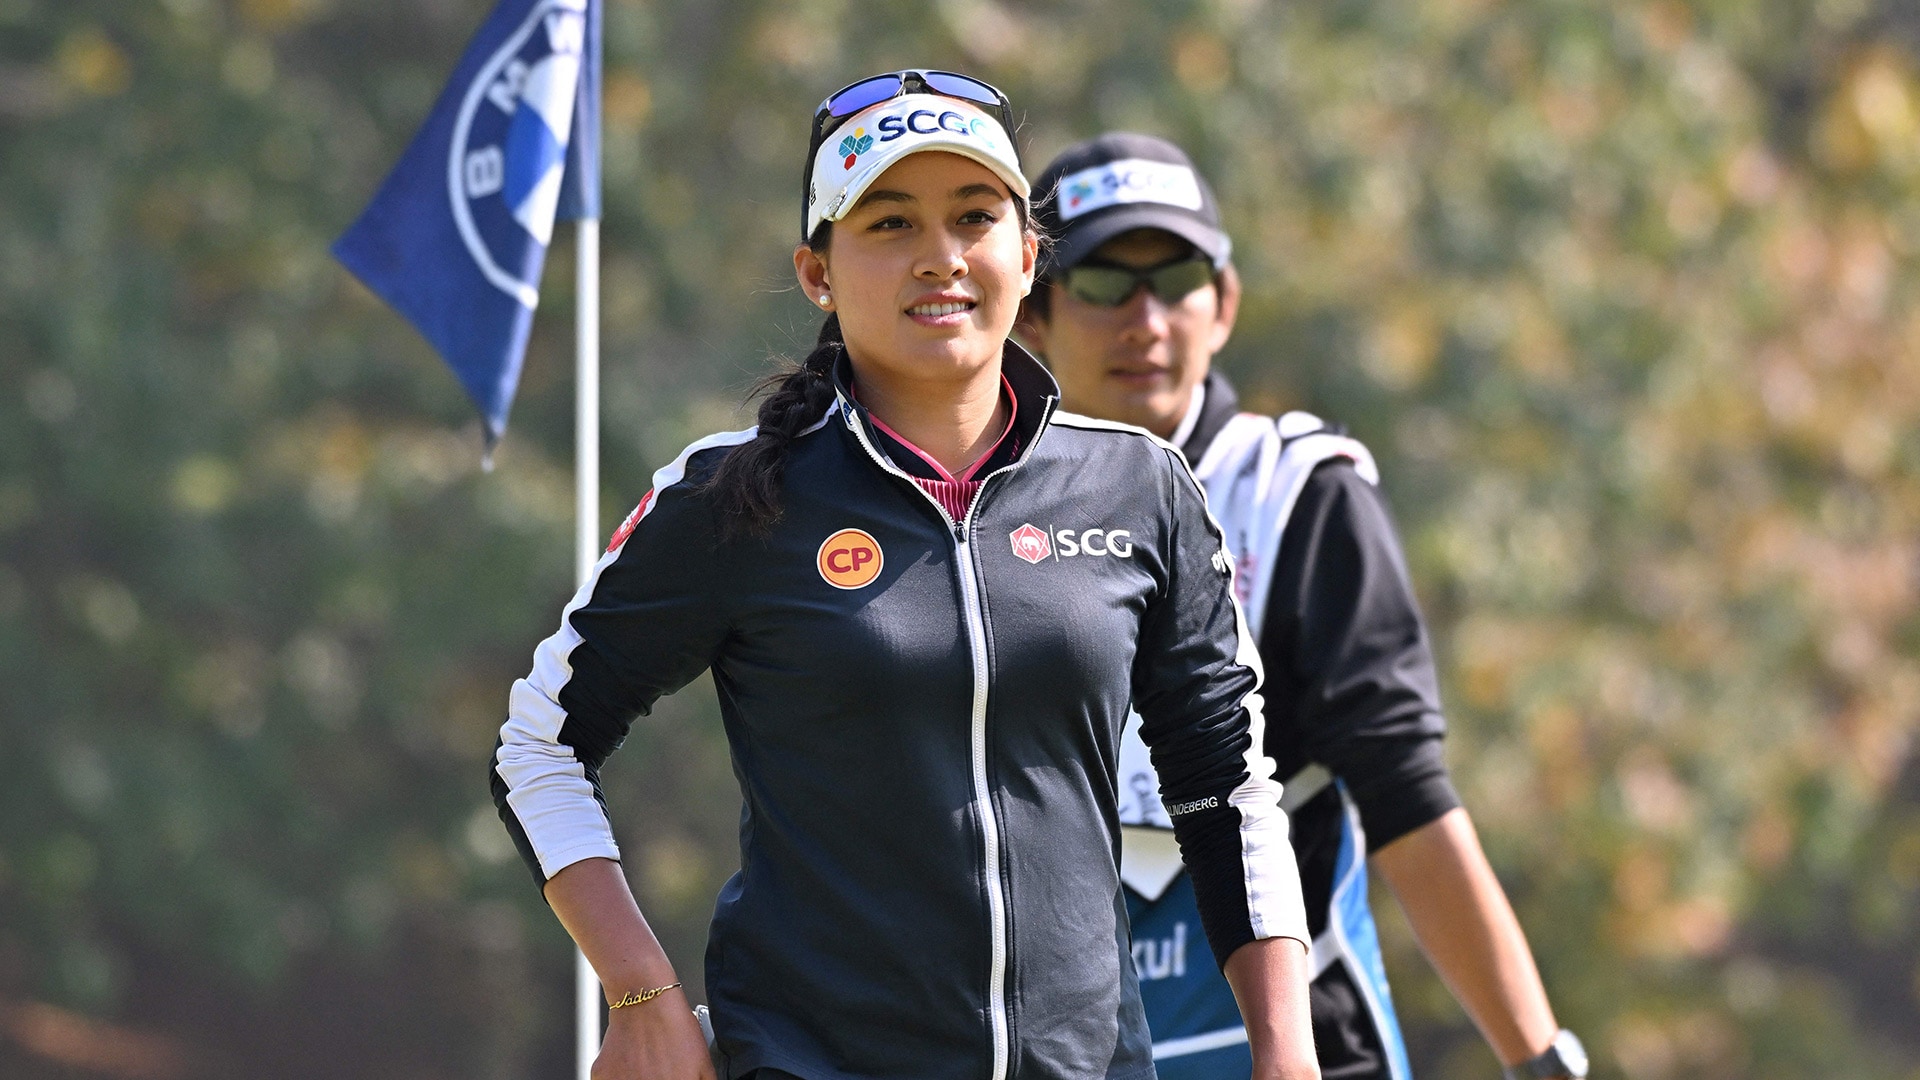 With much on line, BMW Ladies leader Atthaya Thitikul has eyes solely on prize